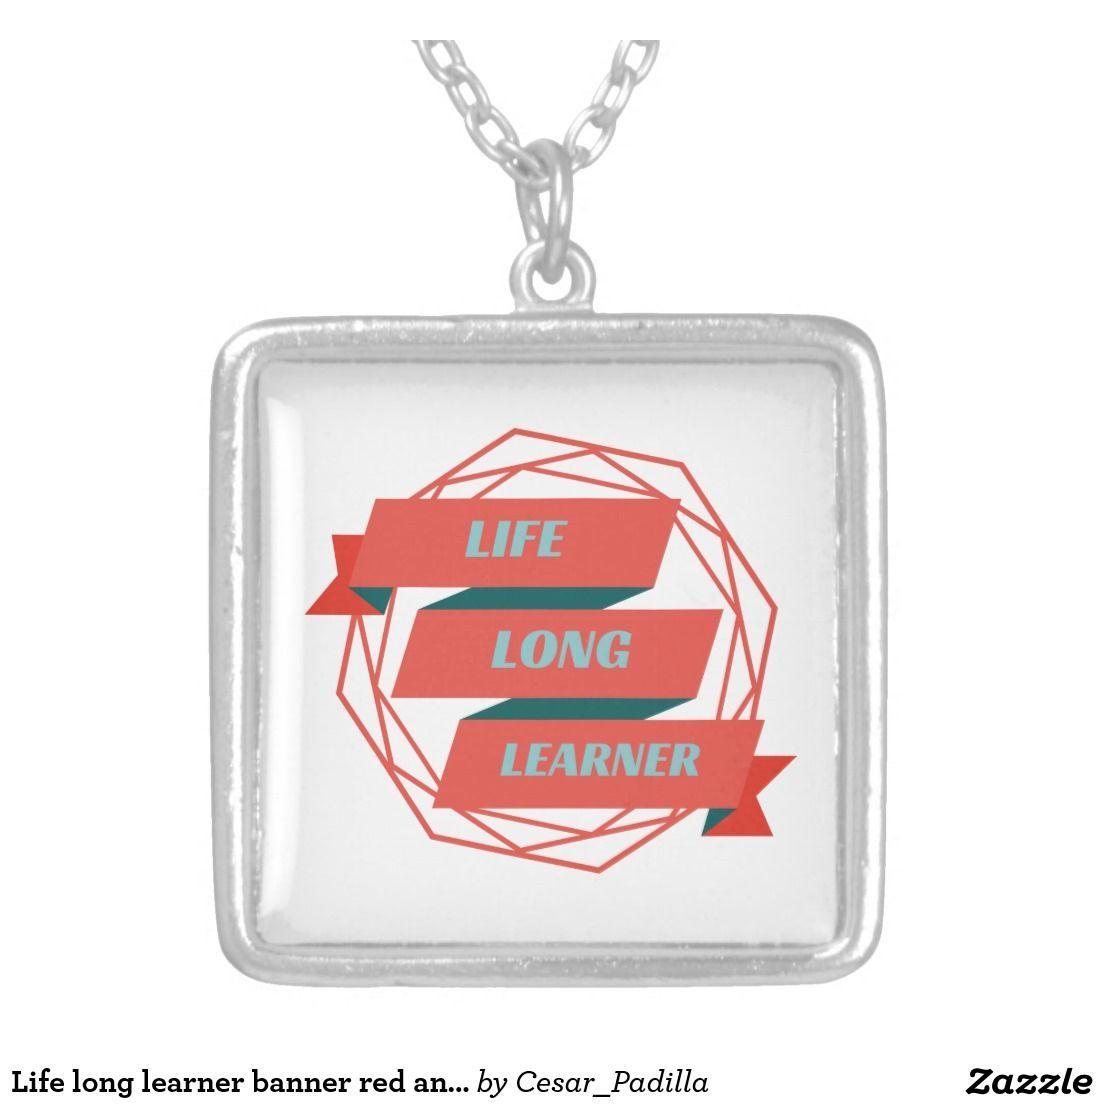 Red and Blue Square Logo - Life long learner banner red and blue square pendant necklace ...